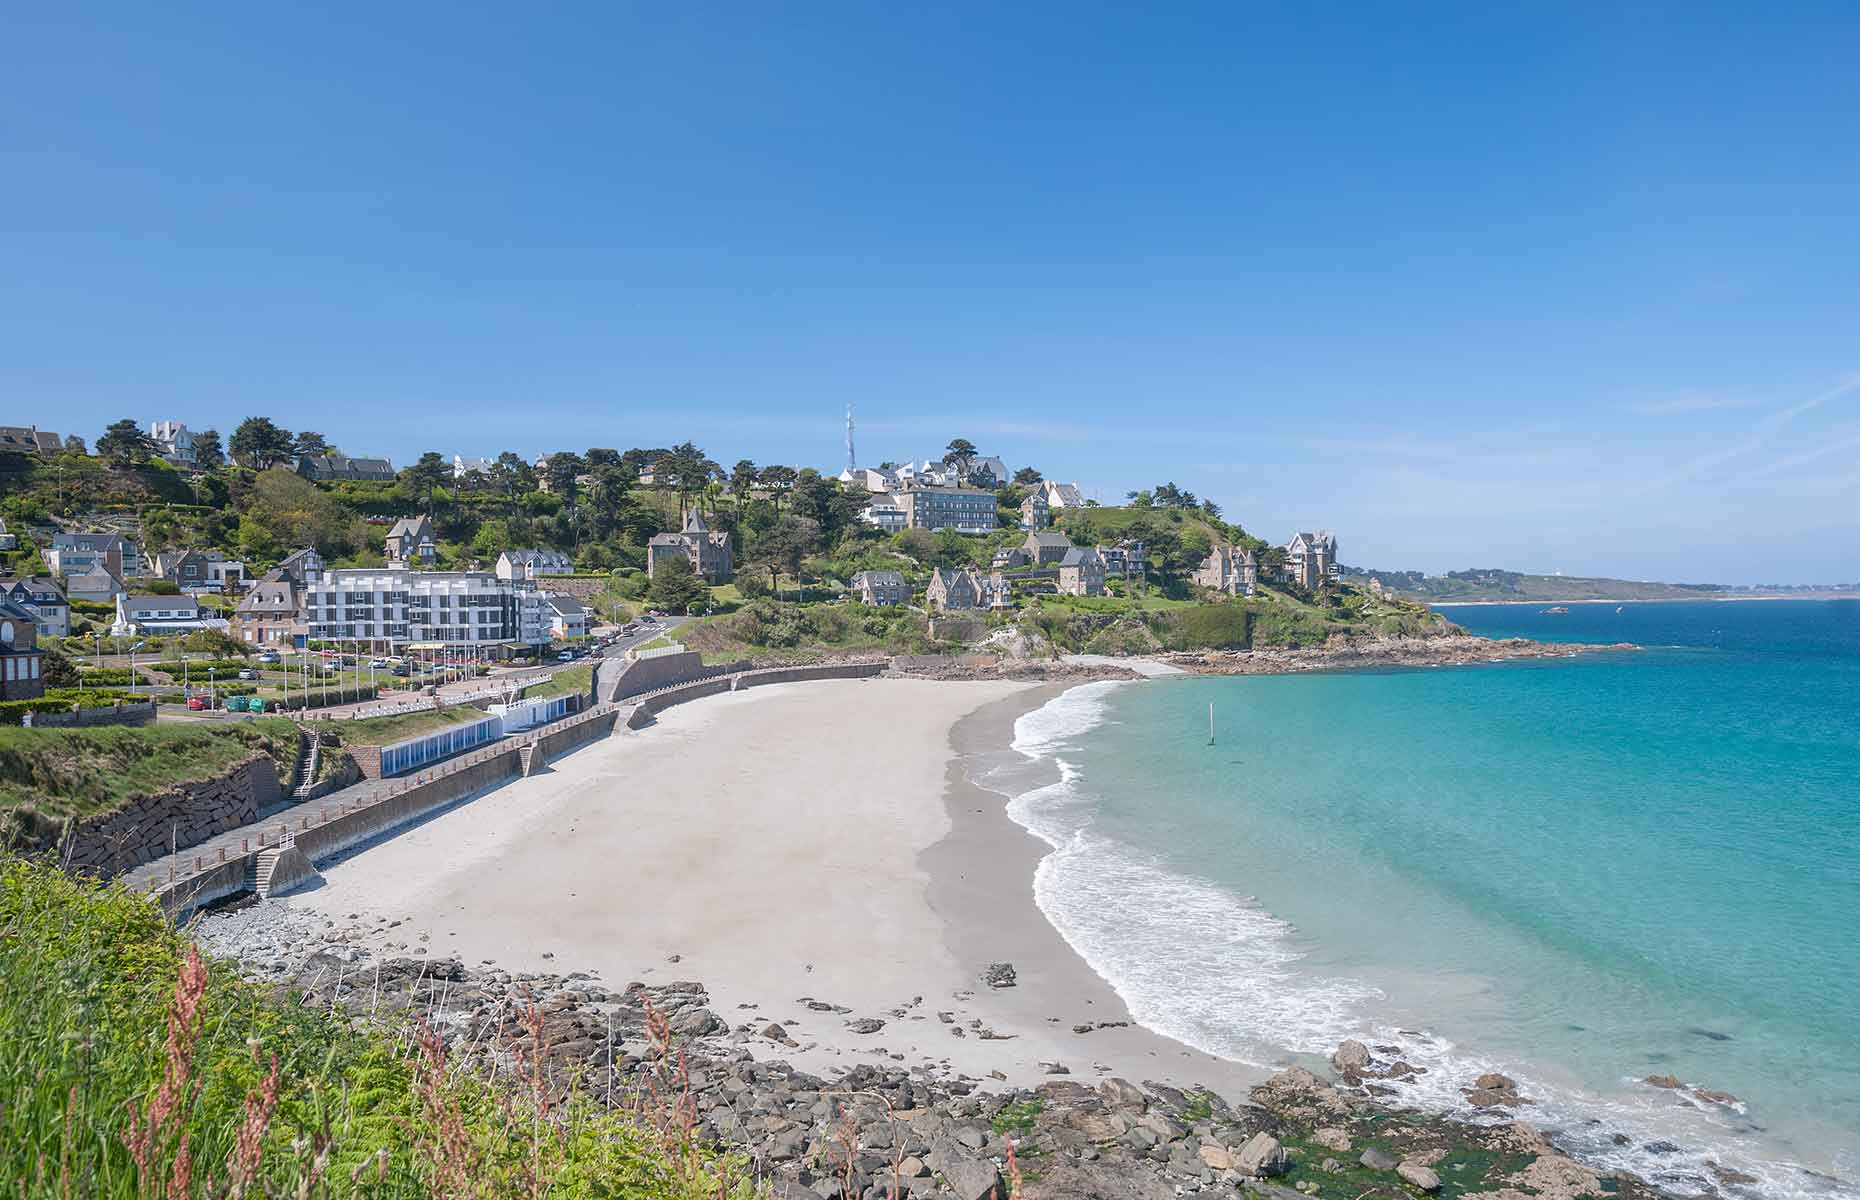 Beach and Village of Perros-Guirec in Brittany, France (Image: travelpeter/Shutterstock)